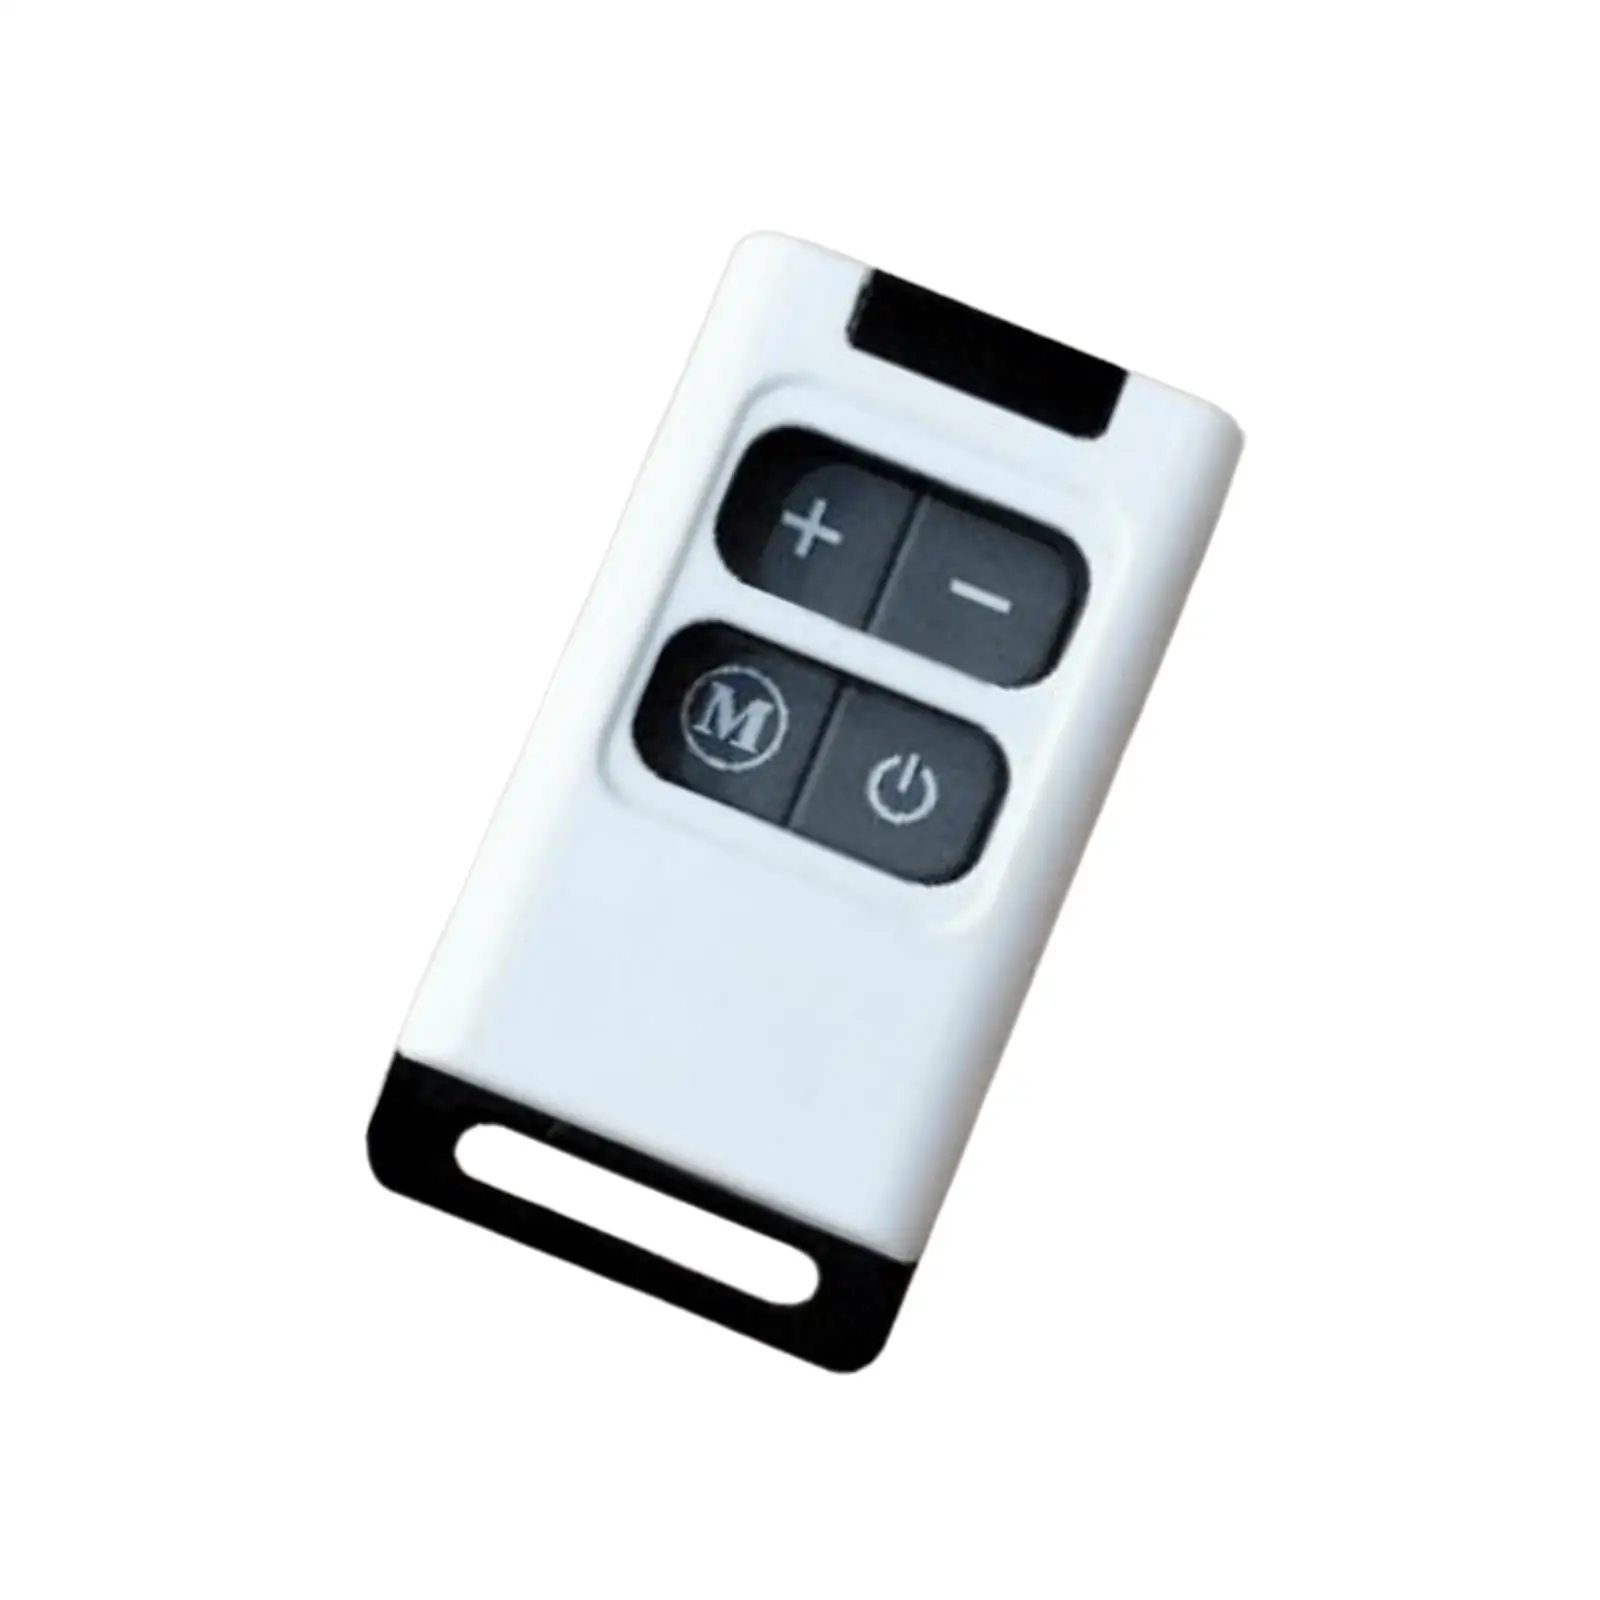 Car Parking Heater Remote Control for Automotive Heater Controller Boat